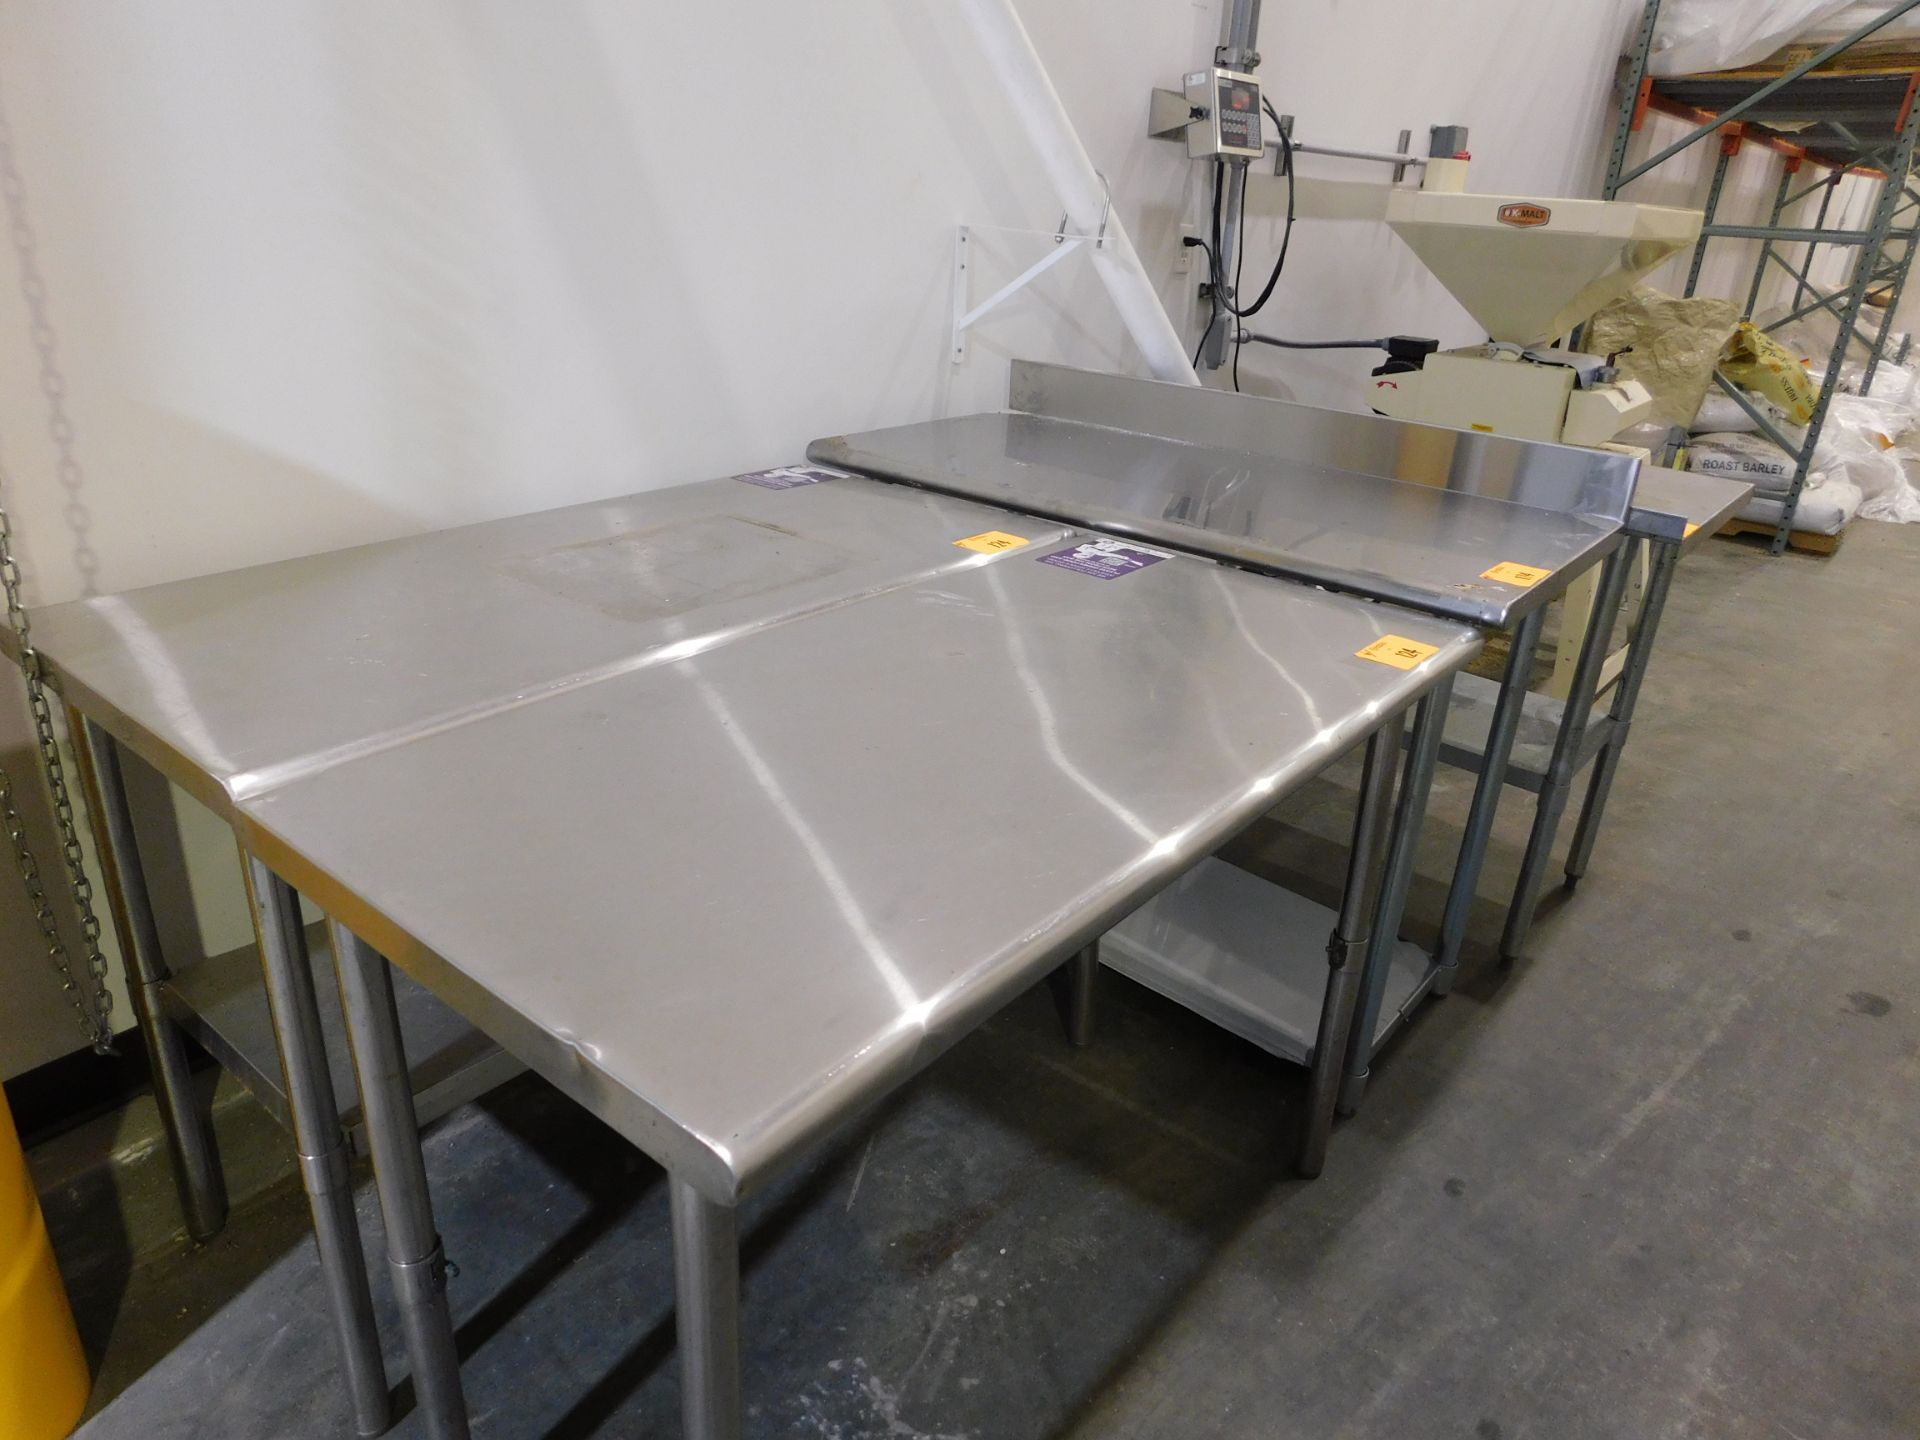 Stainless Tables - Image 2 of 3